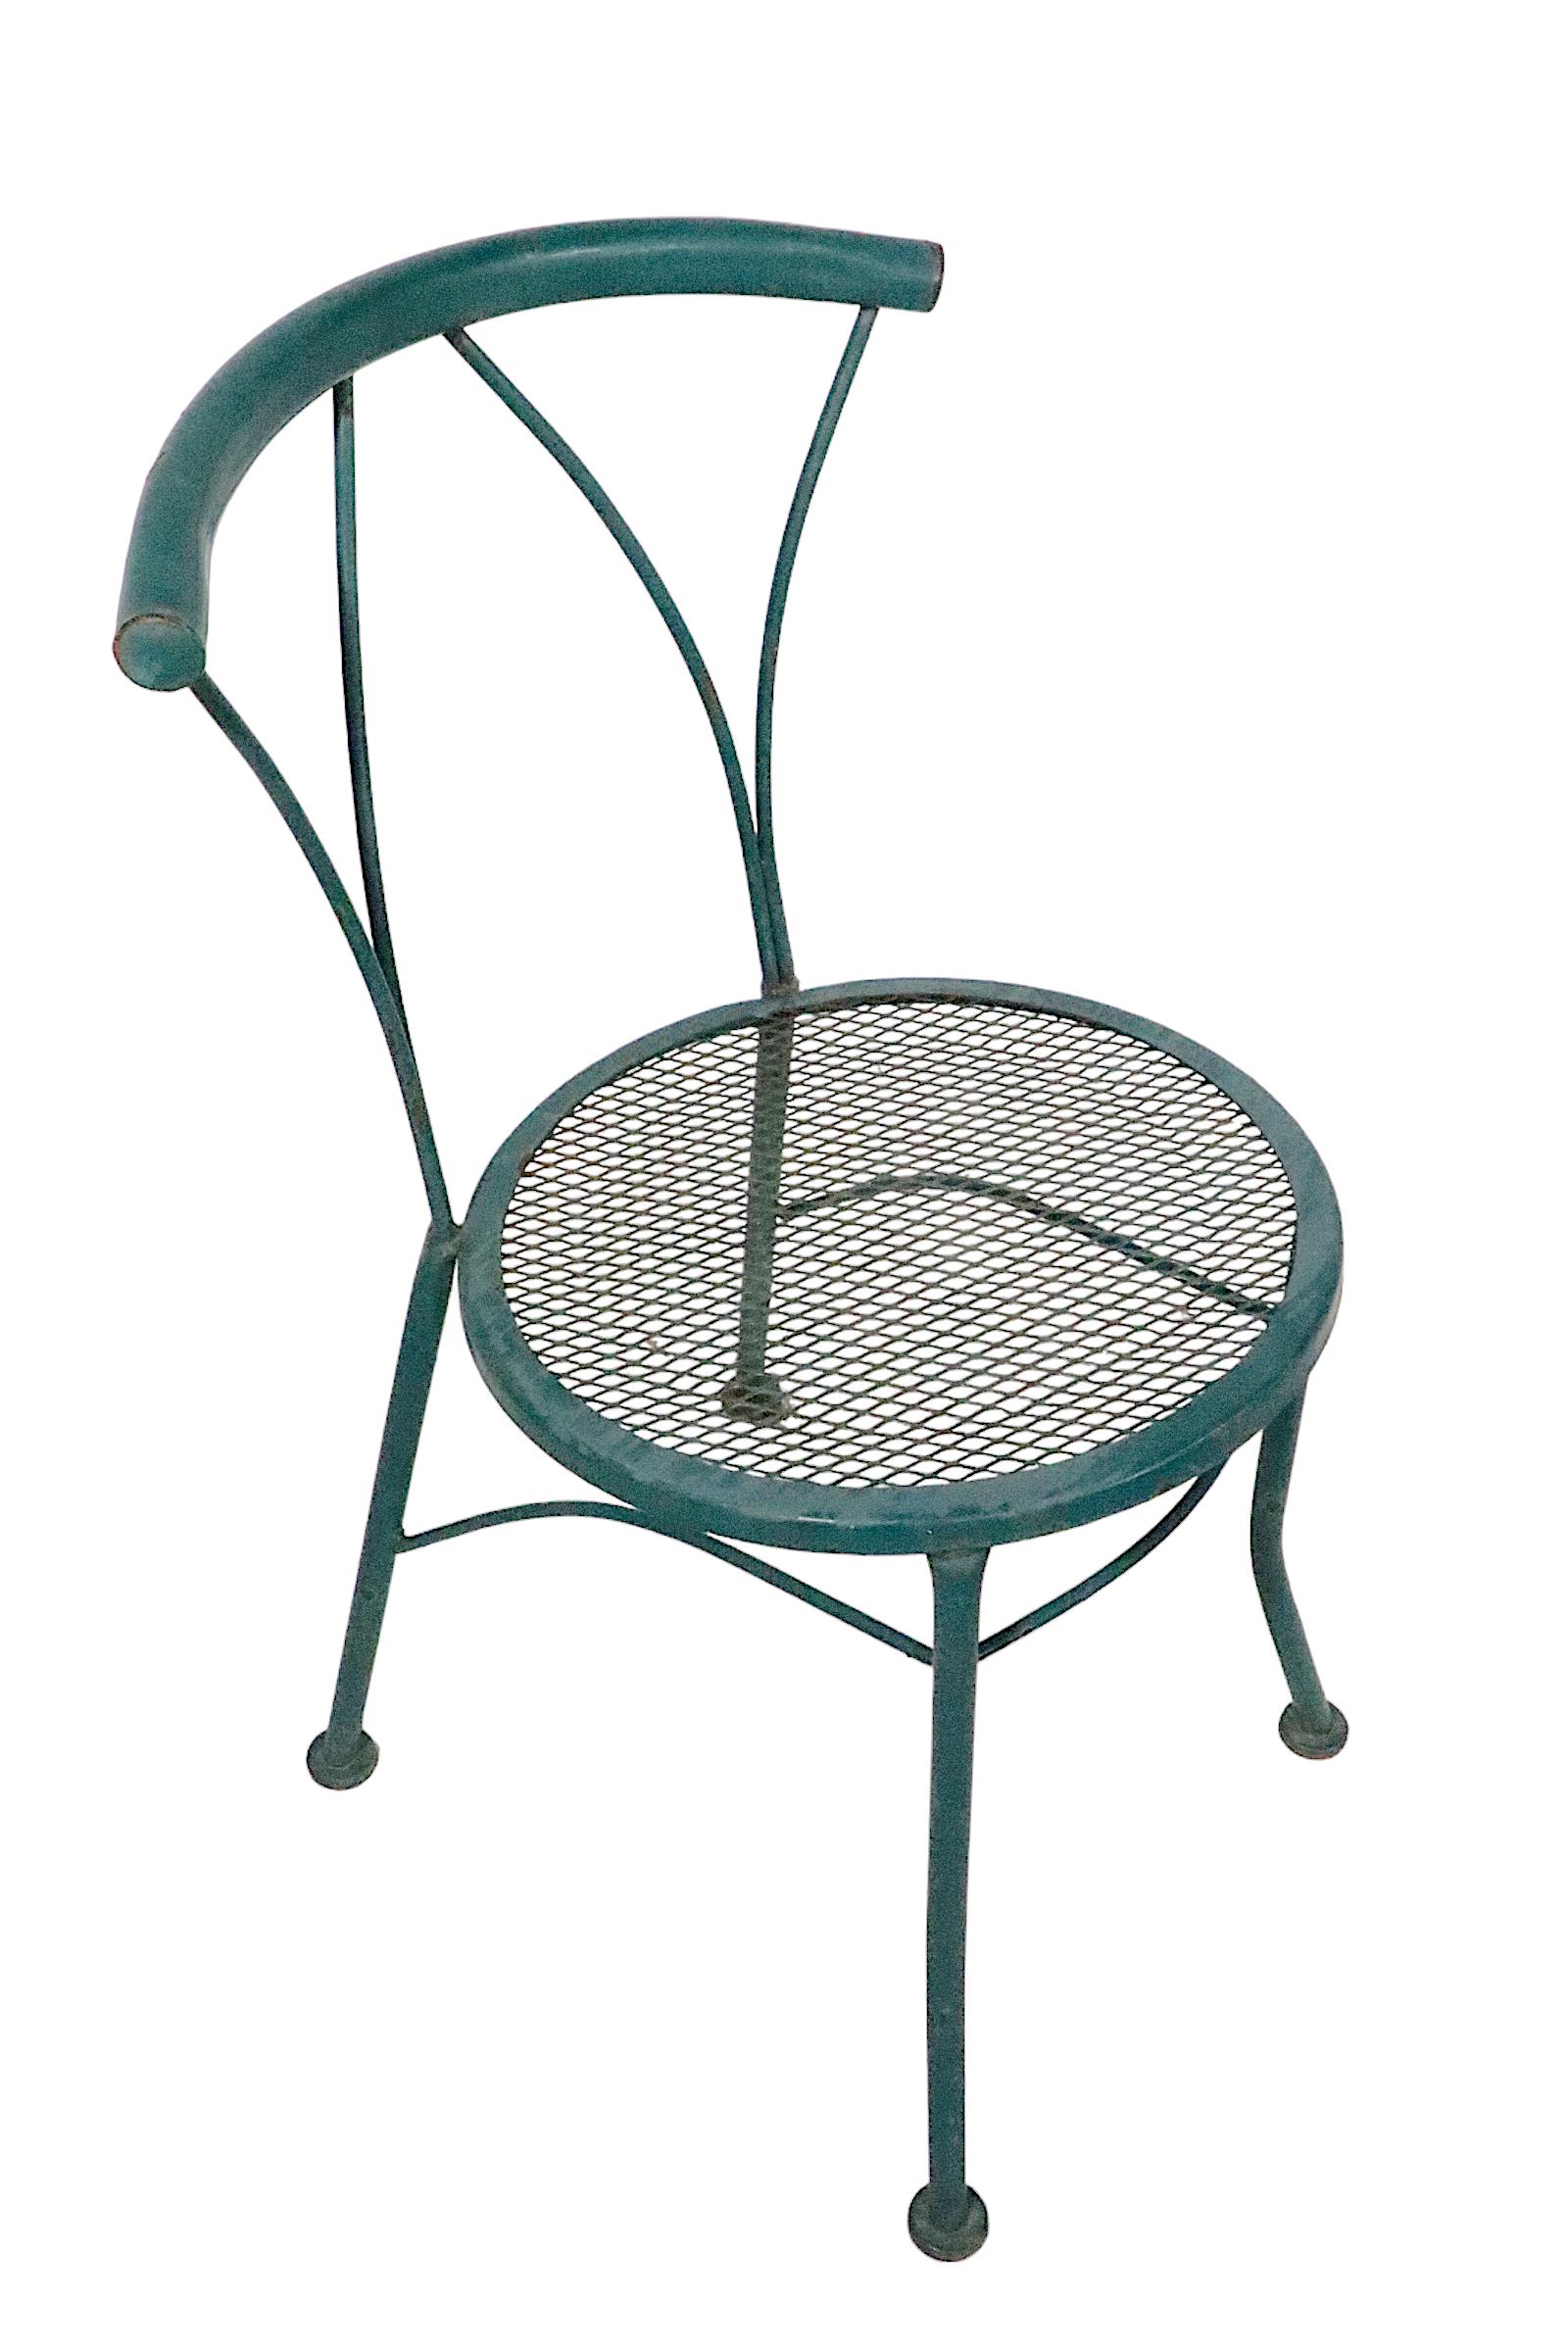 Pr. Wrought Iron and Metal Mesh Garden Patio Poolside Bistro Cafe  Dining Chairs For Sale 11